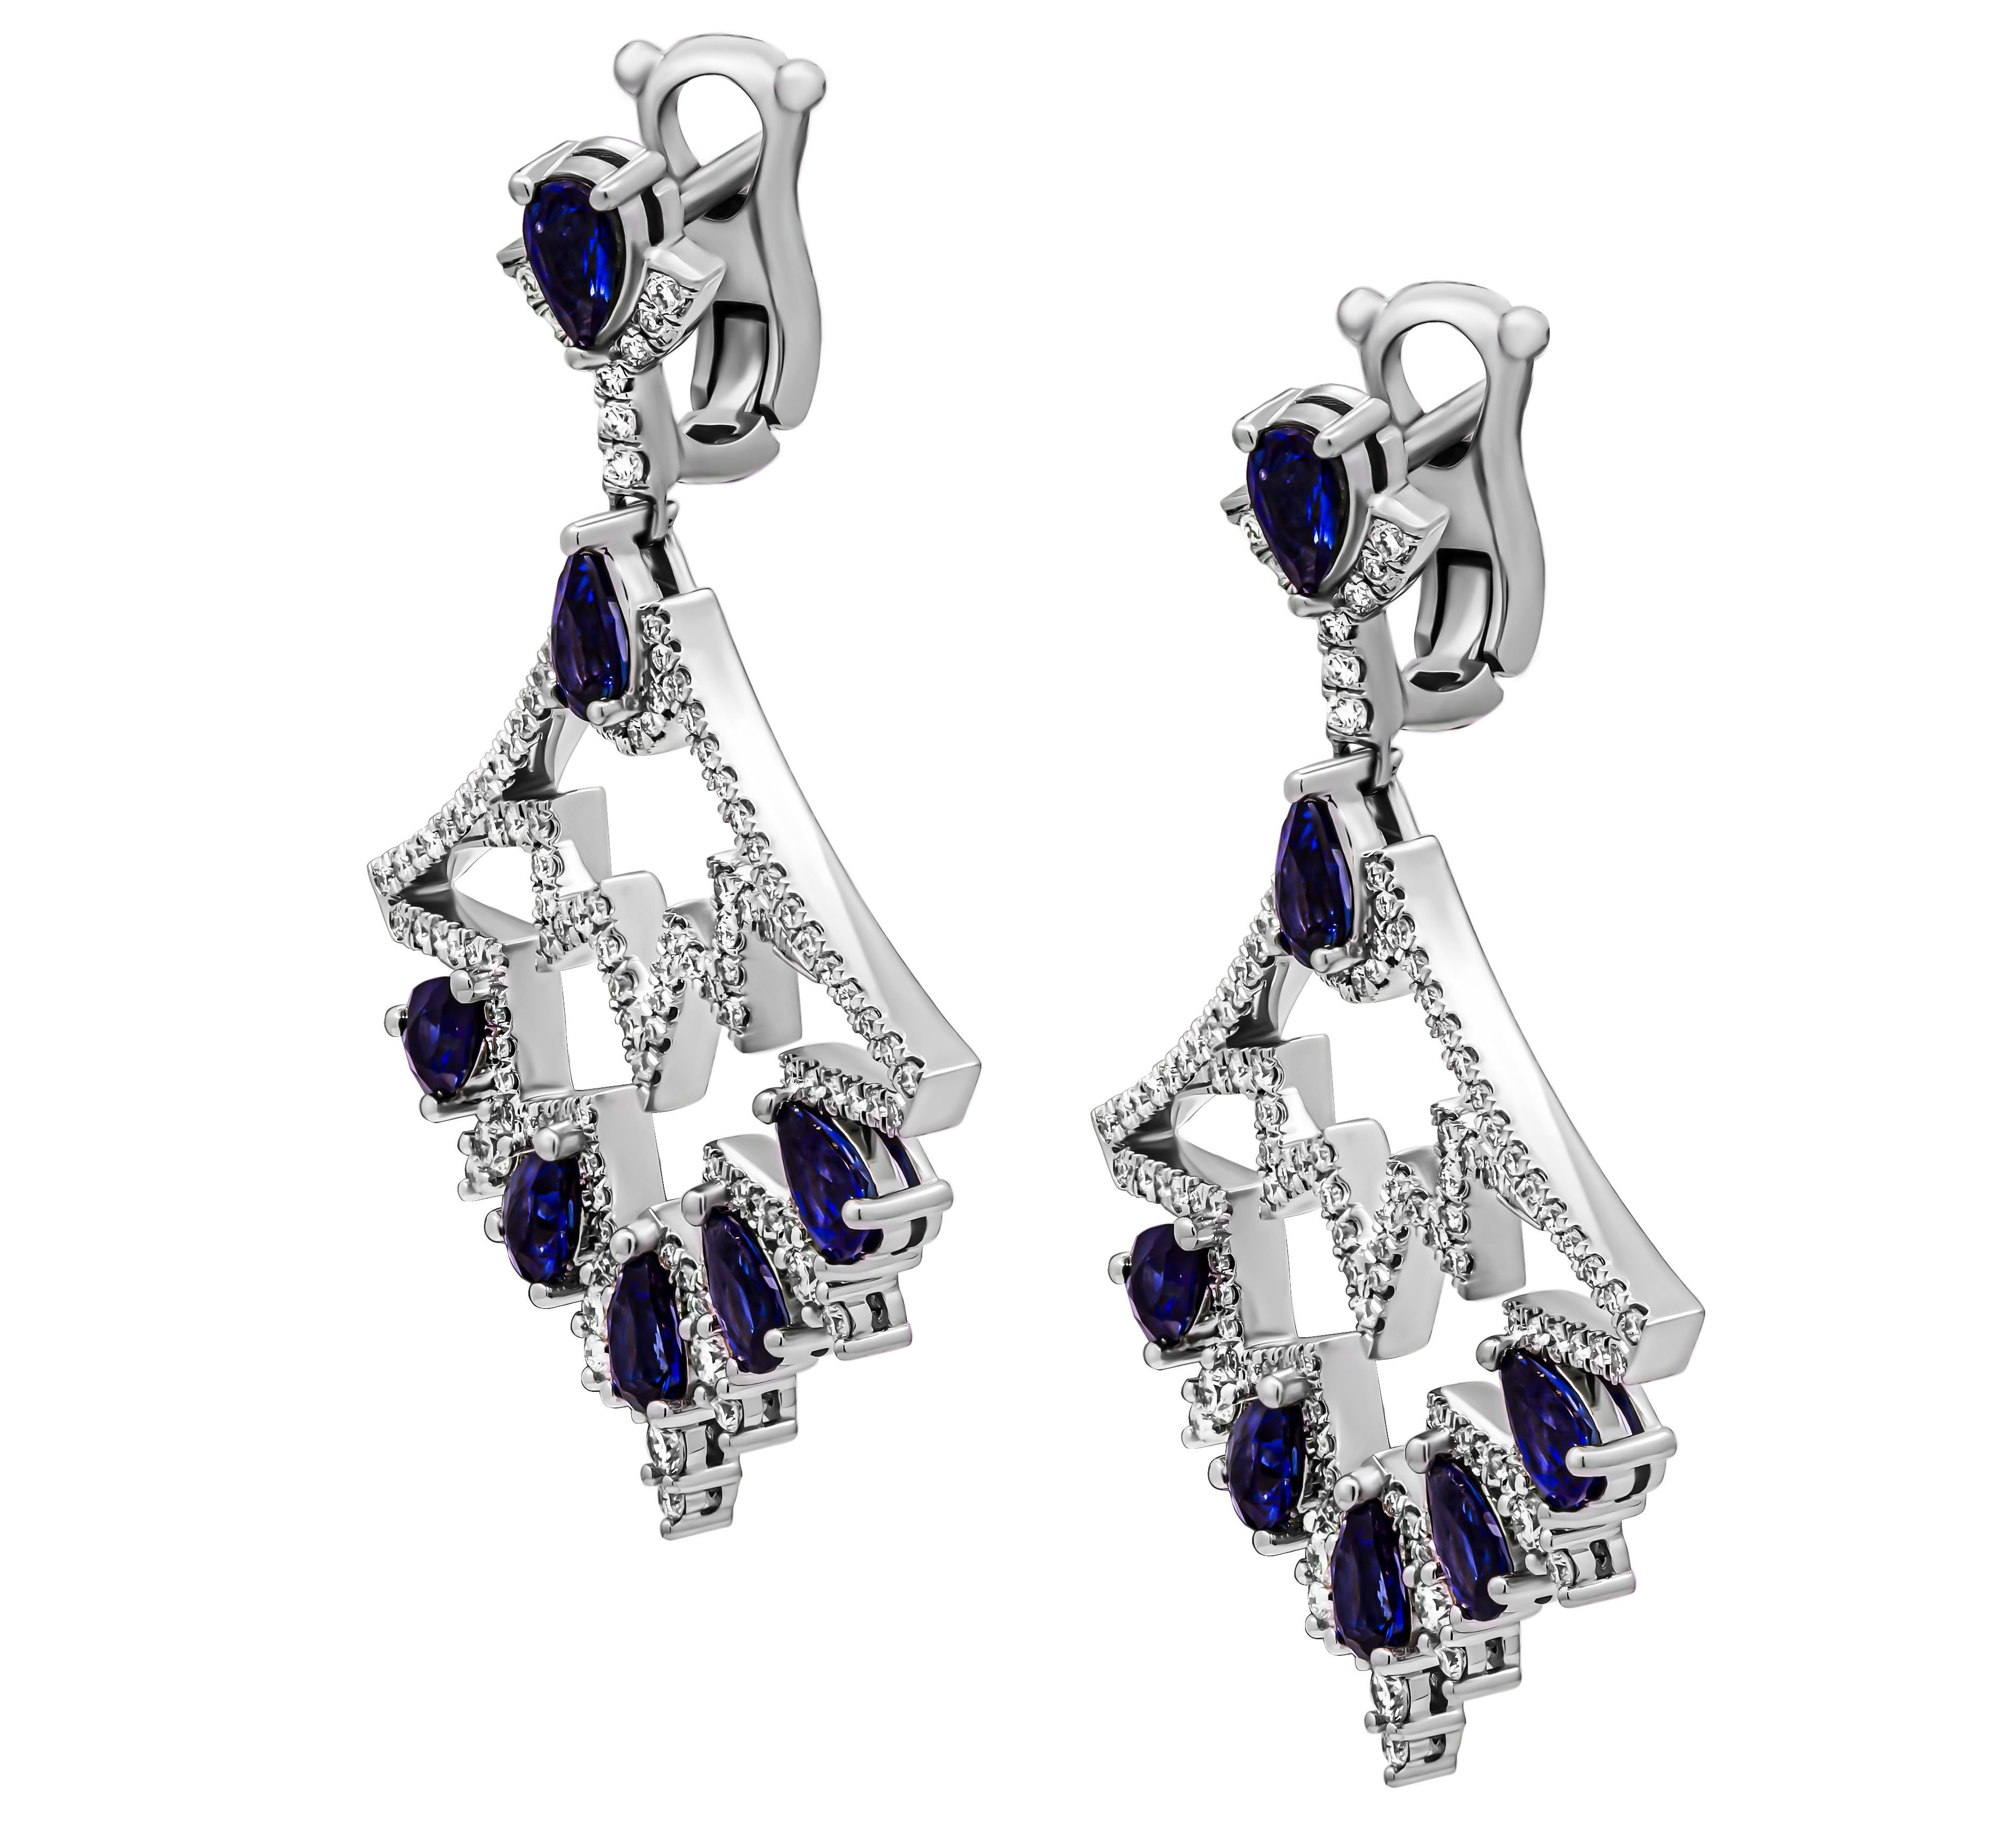 ntroducing our stunning Blue Sapphire Chandelier Diamond Earrings, crafted with meticulous attention to detail in lustrous 18K white gold. These earrings are a true embodiment of sophistication and glamour, featuring a mesmerizing array of fourteen